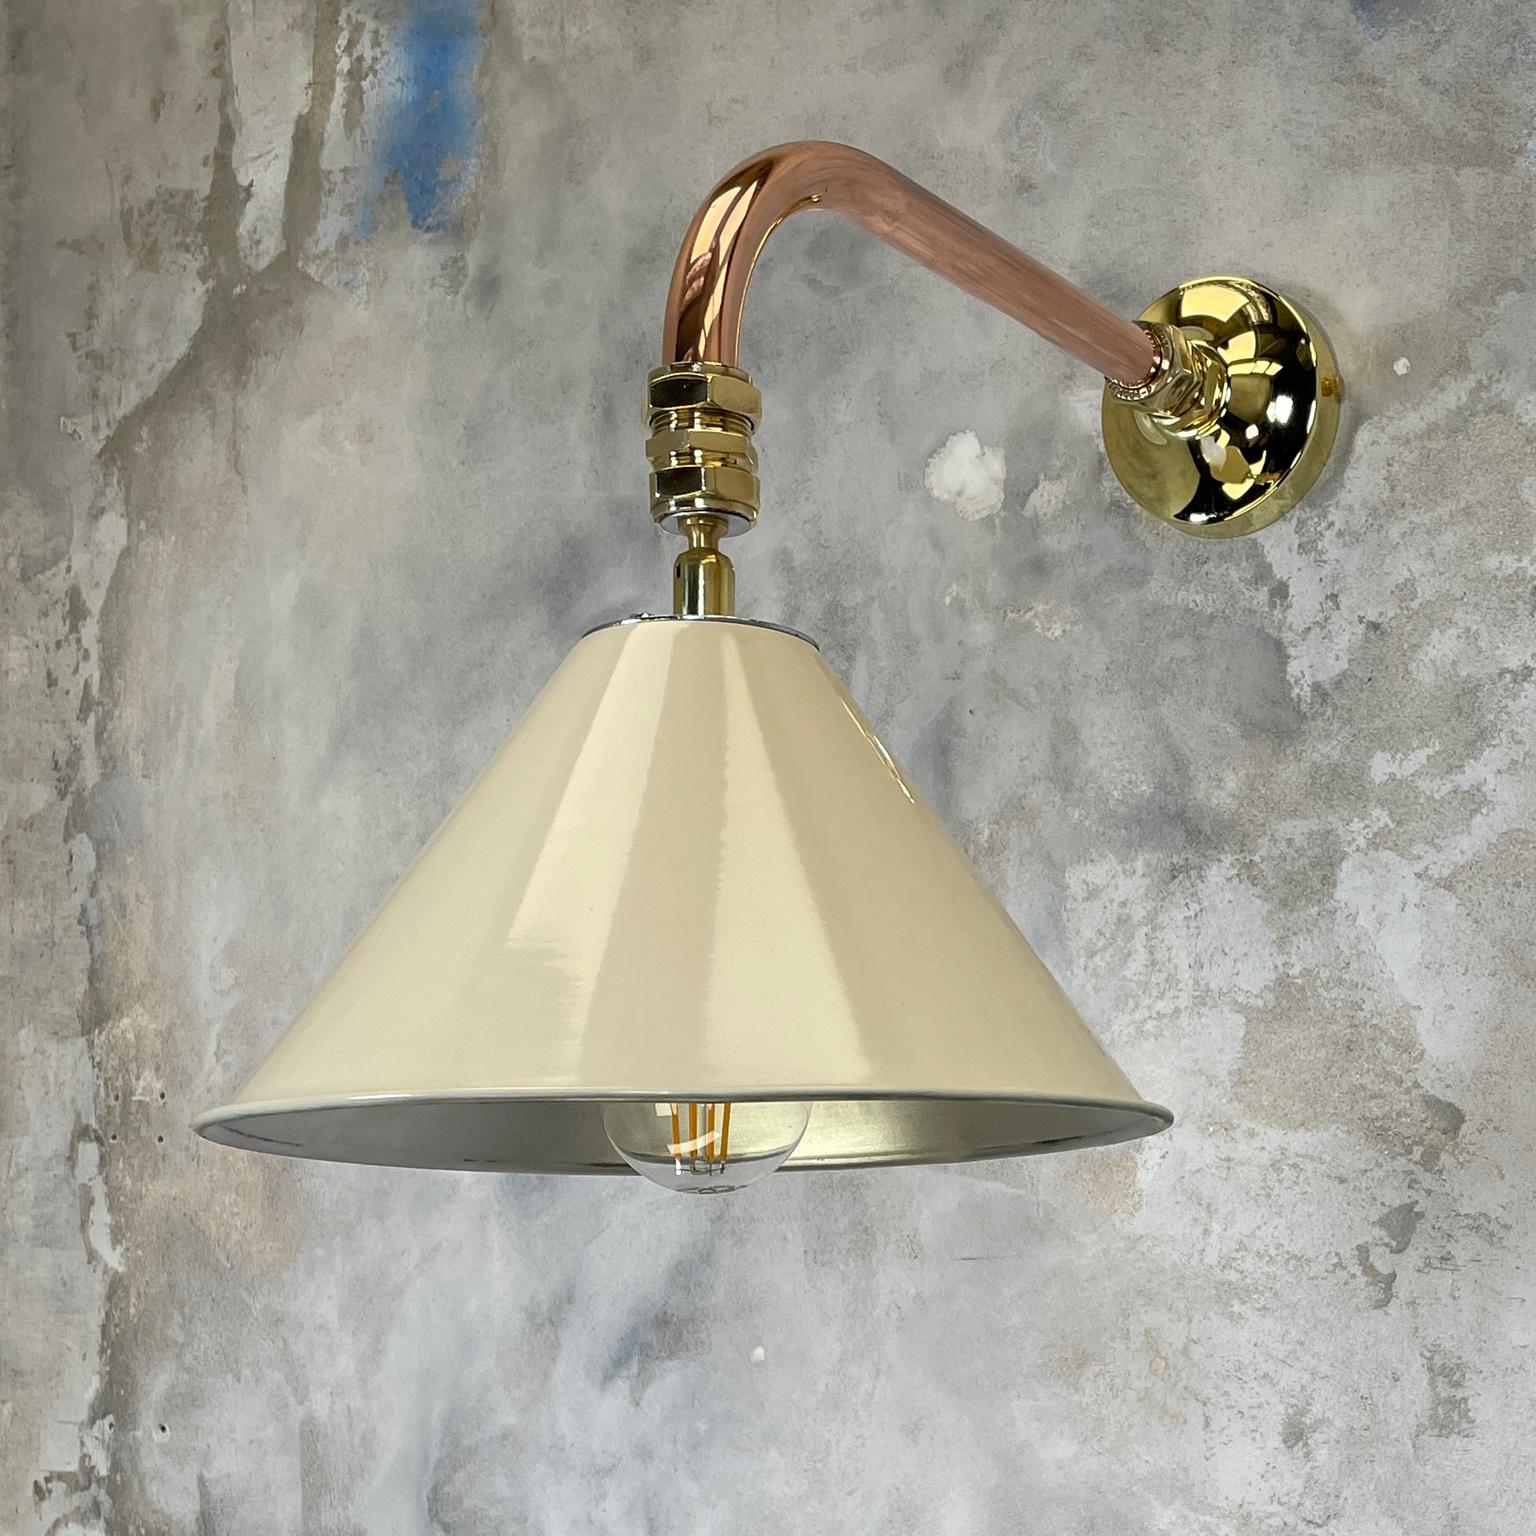 English 1980's Copper & Brass Cantilever Lamp Cream British Army Lamp Shade For Sale